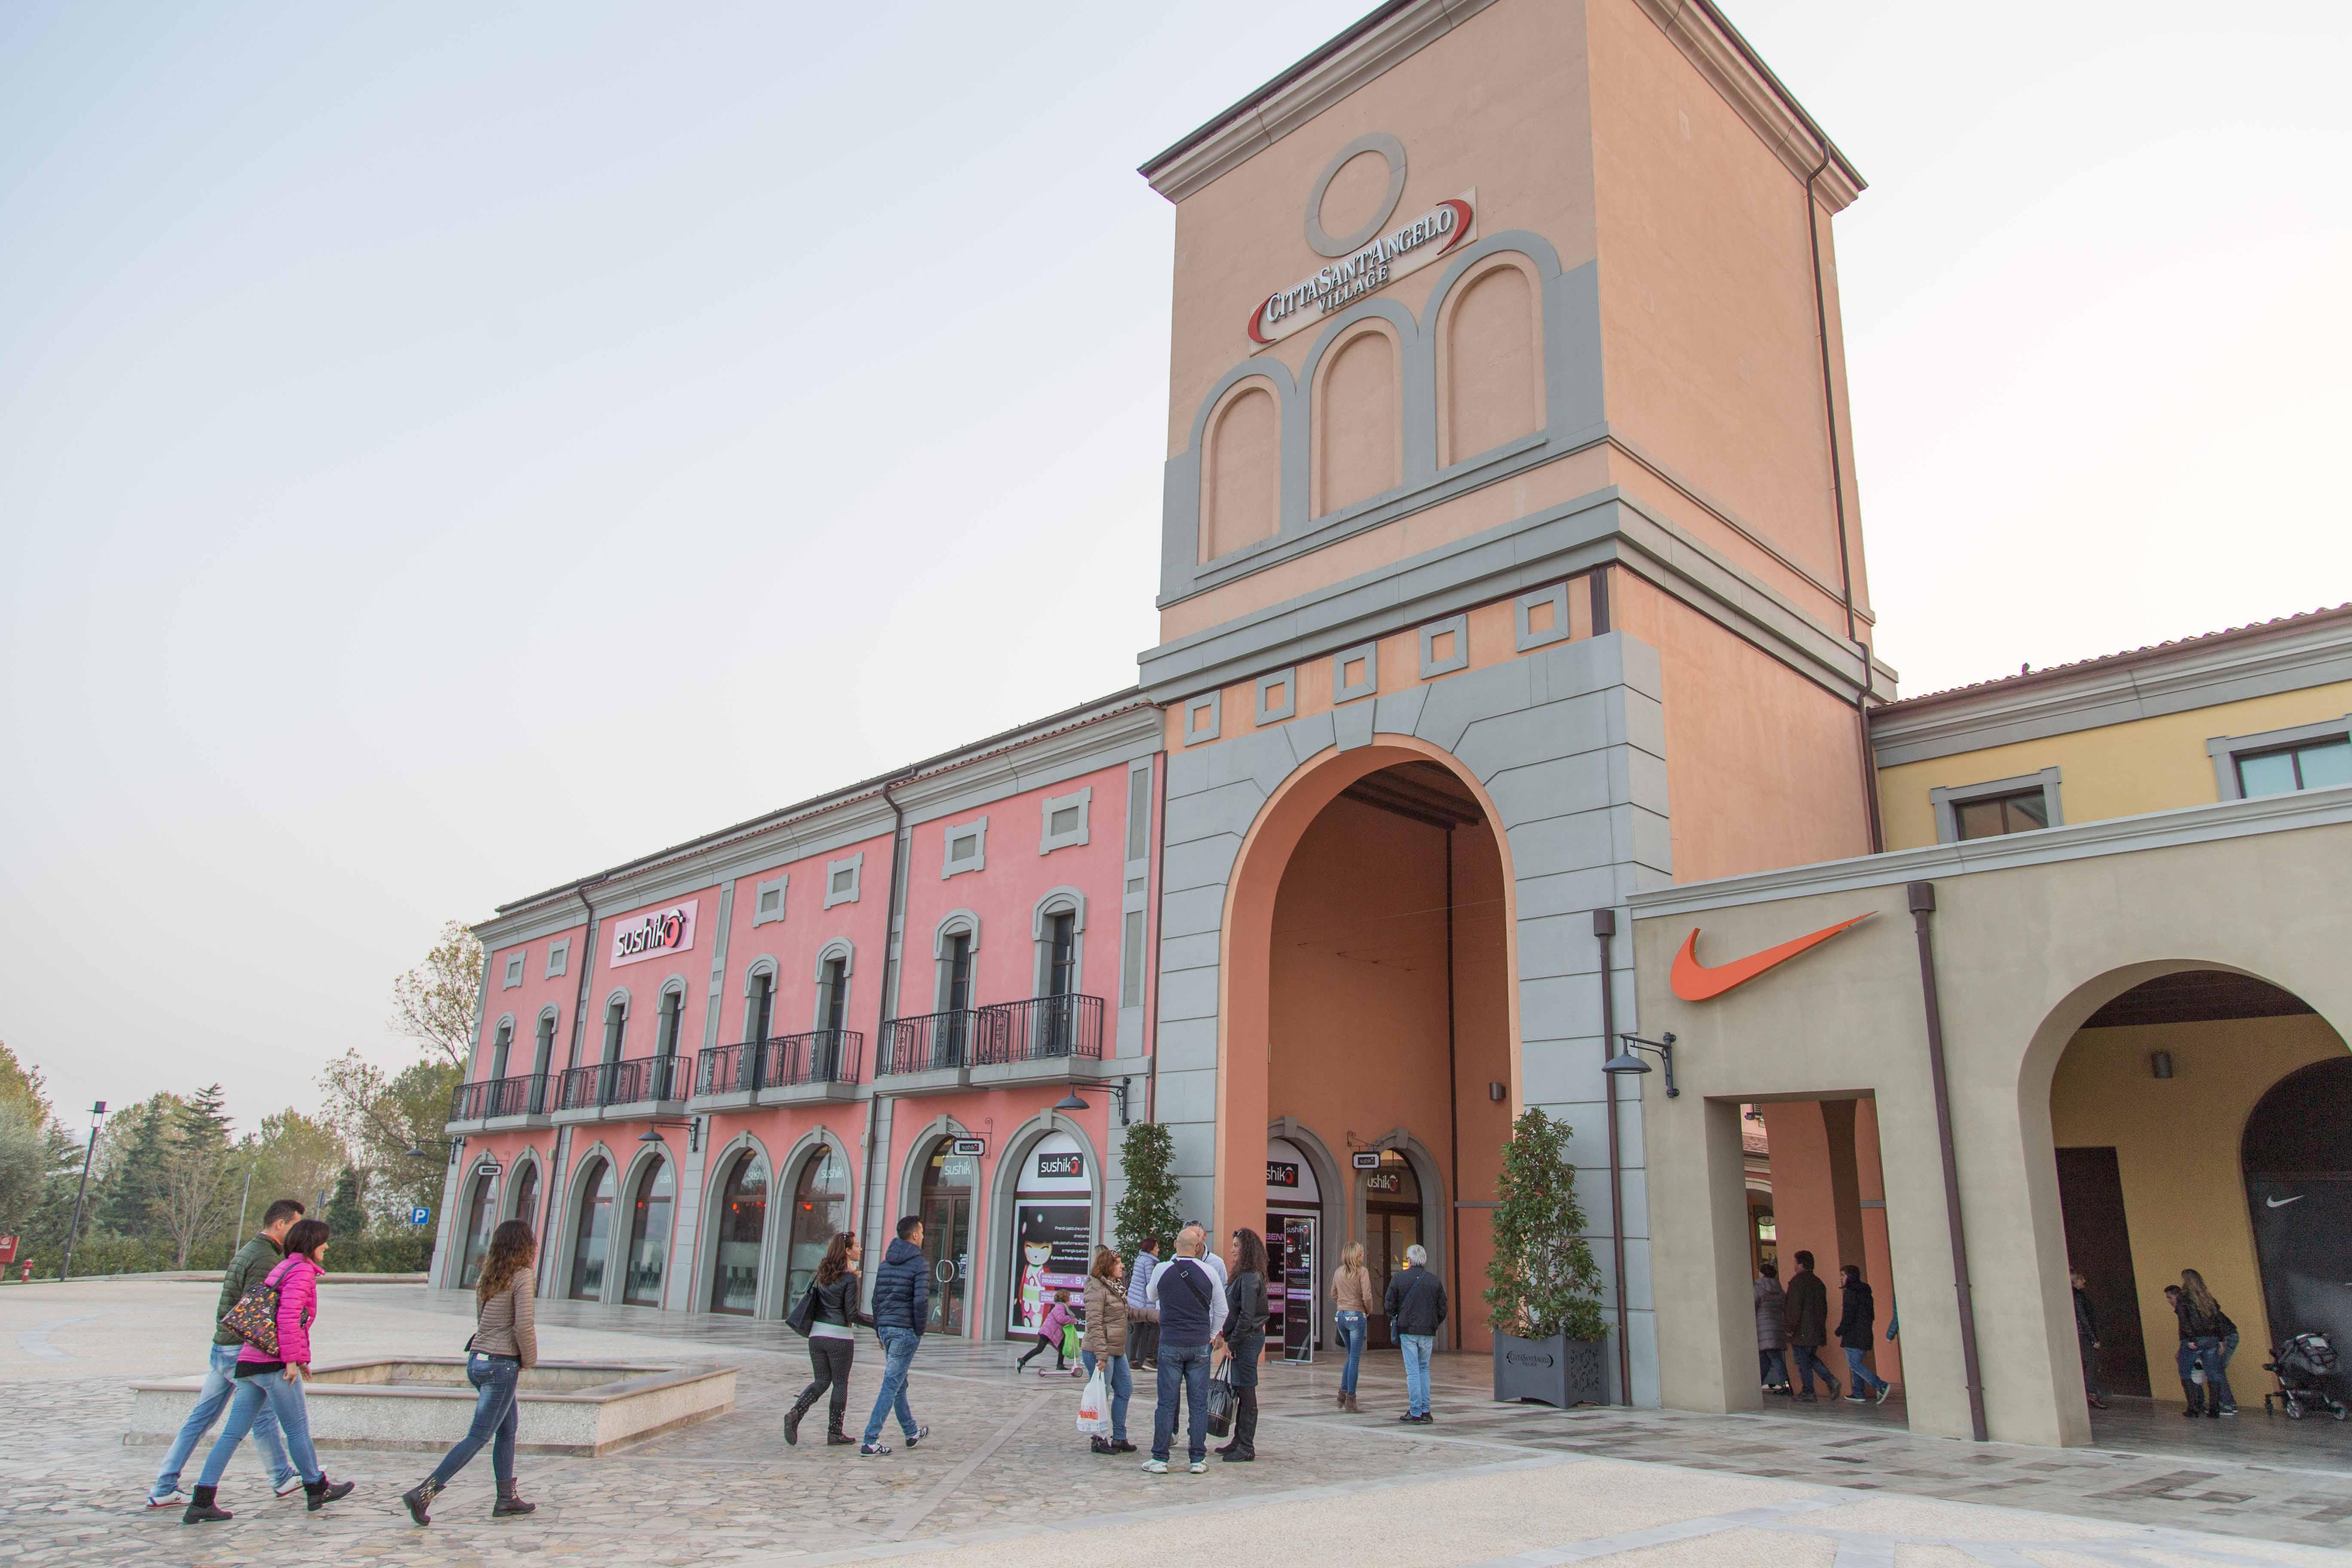 Outlet Citta Sant'angelo